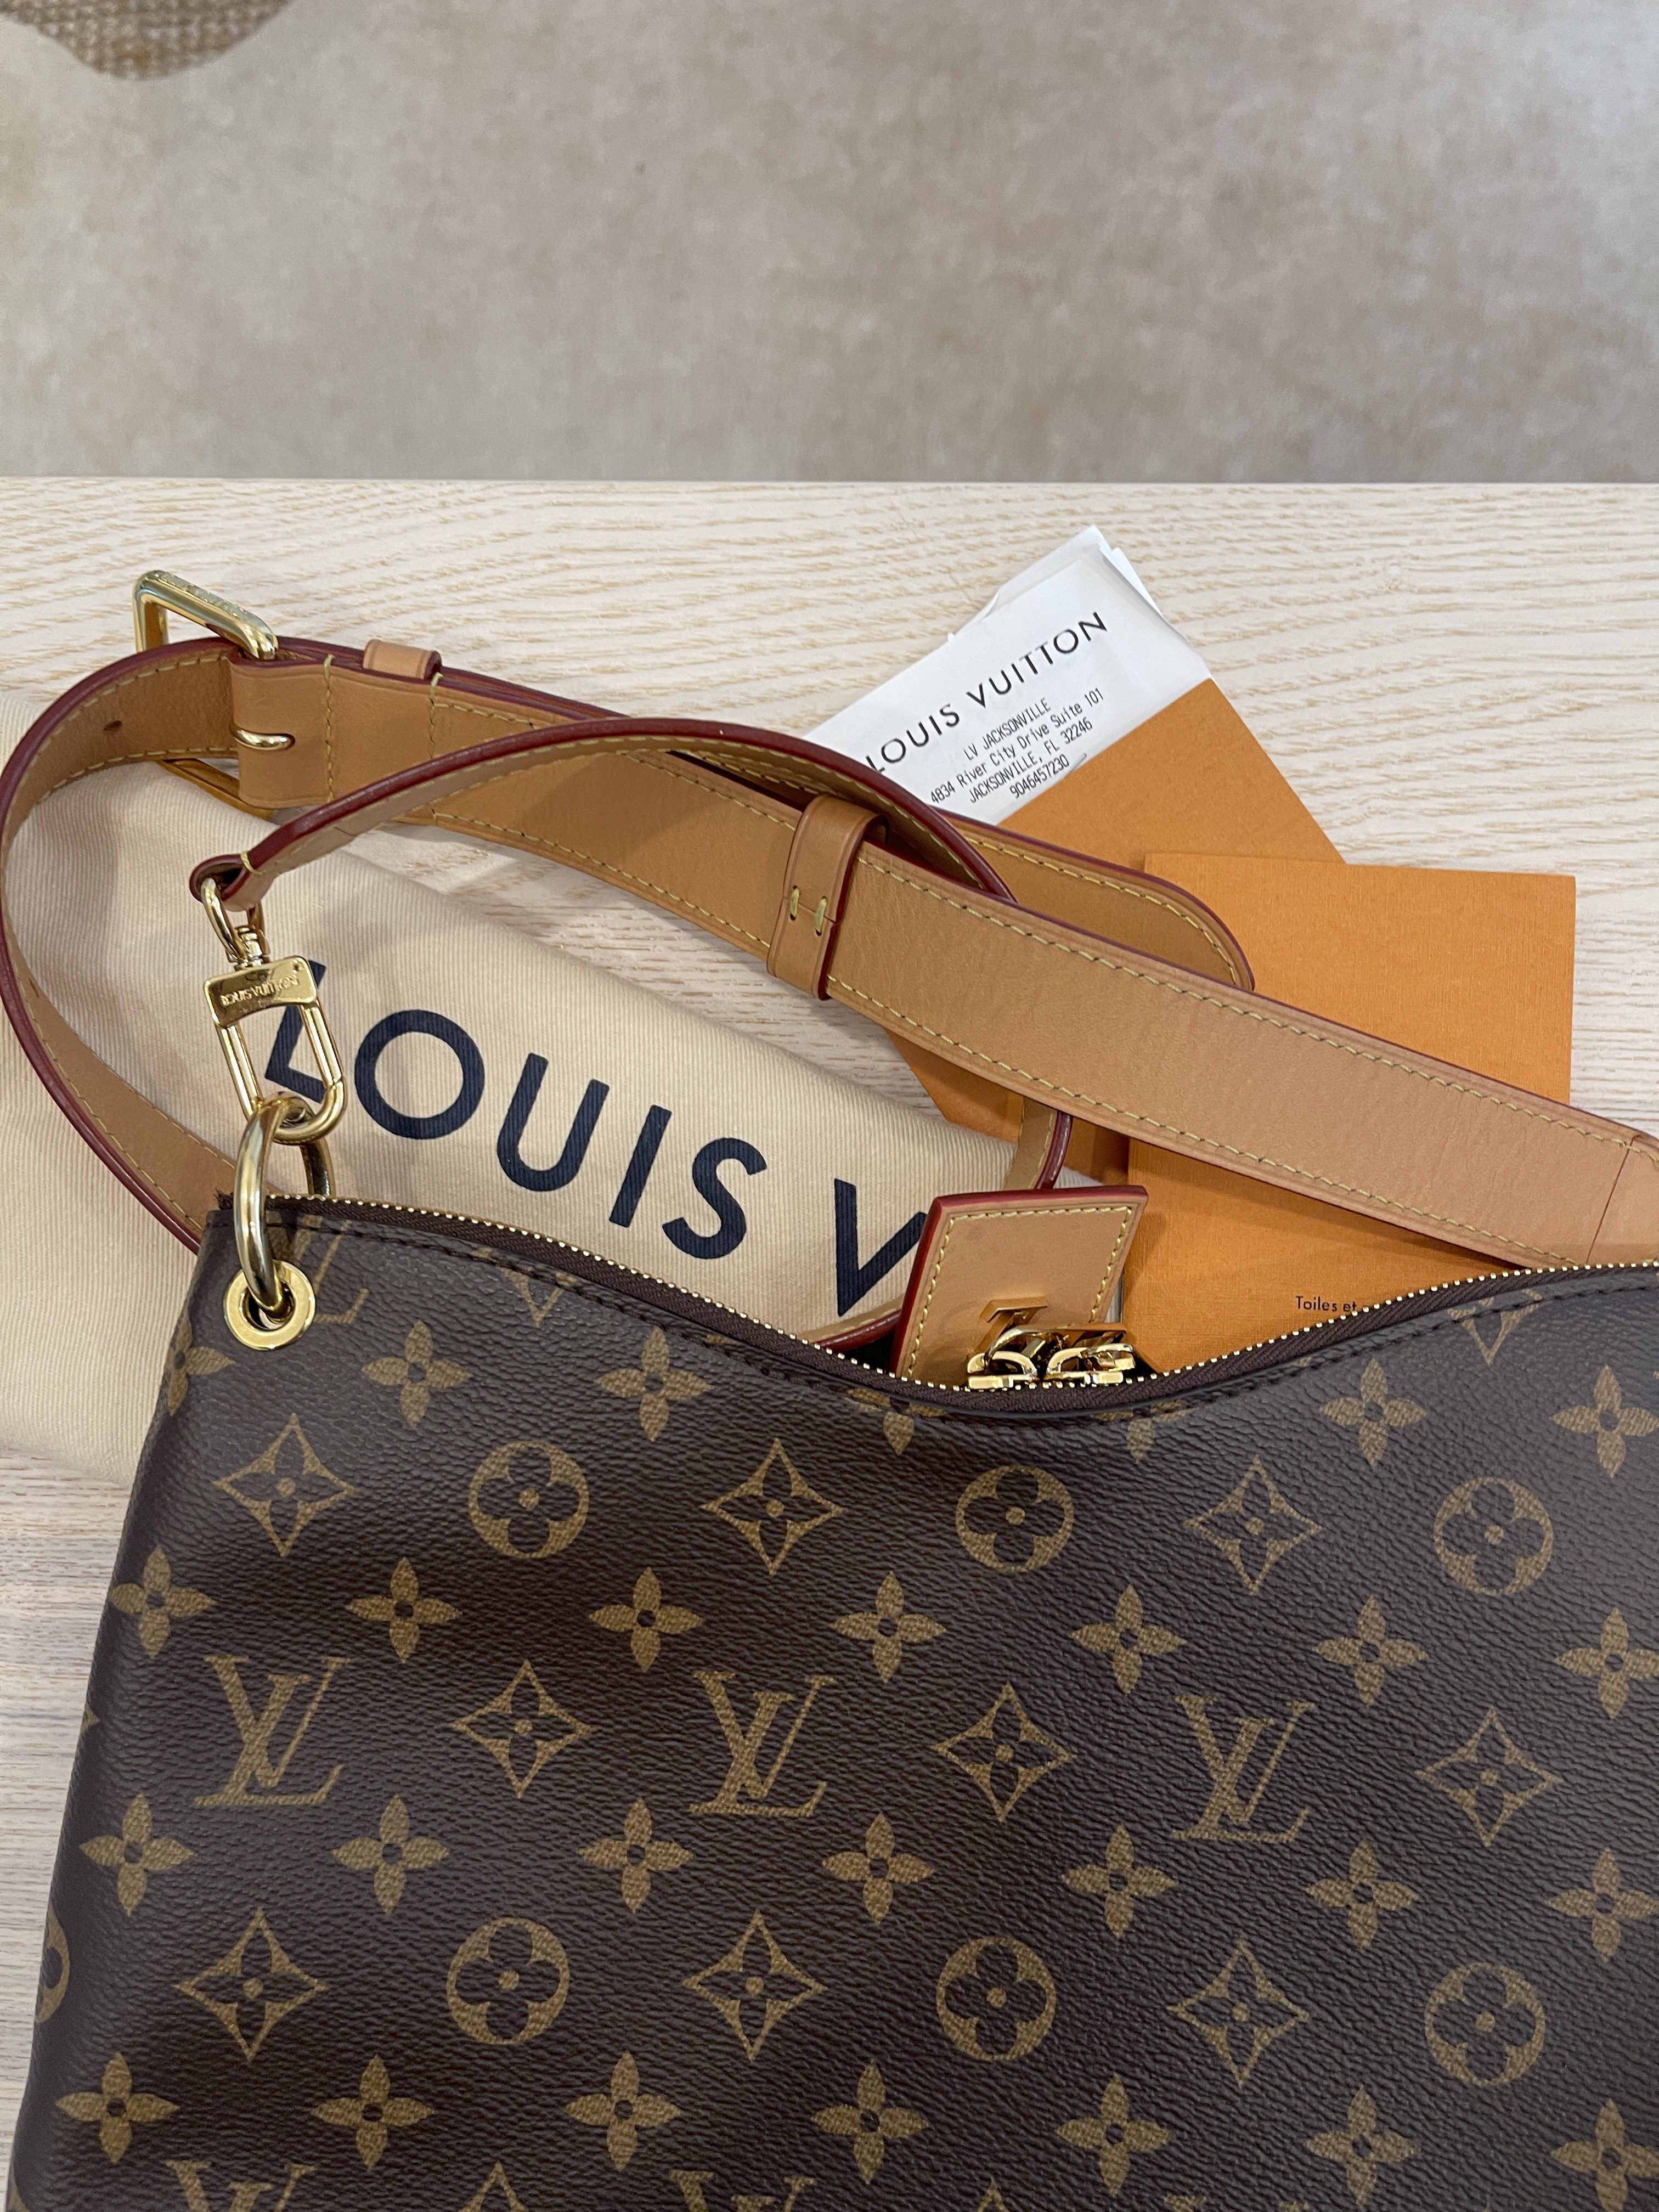 My LV Collection: Louis Vuitton Delightful MM, Odeon PM, and